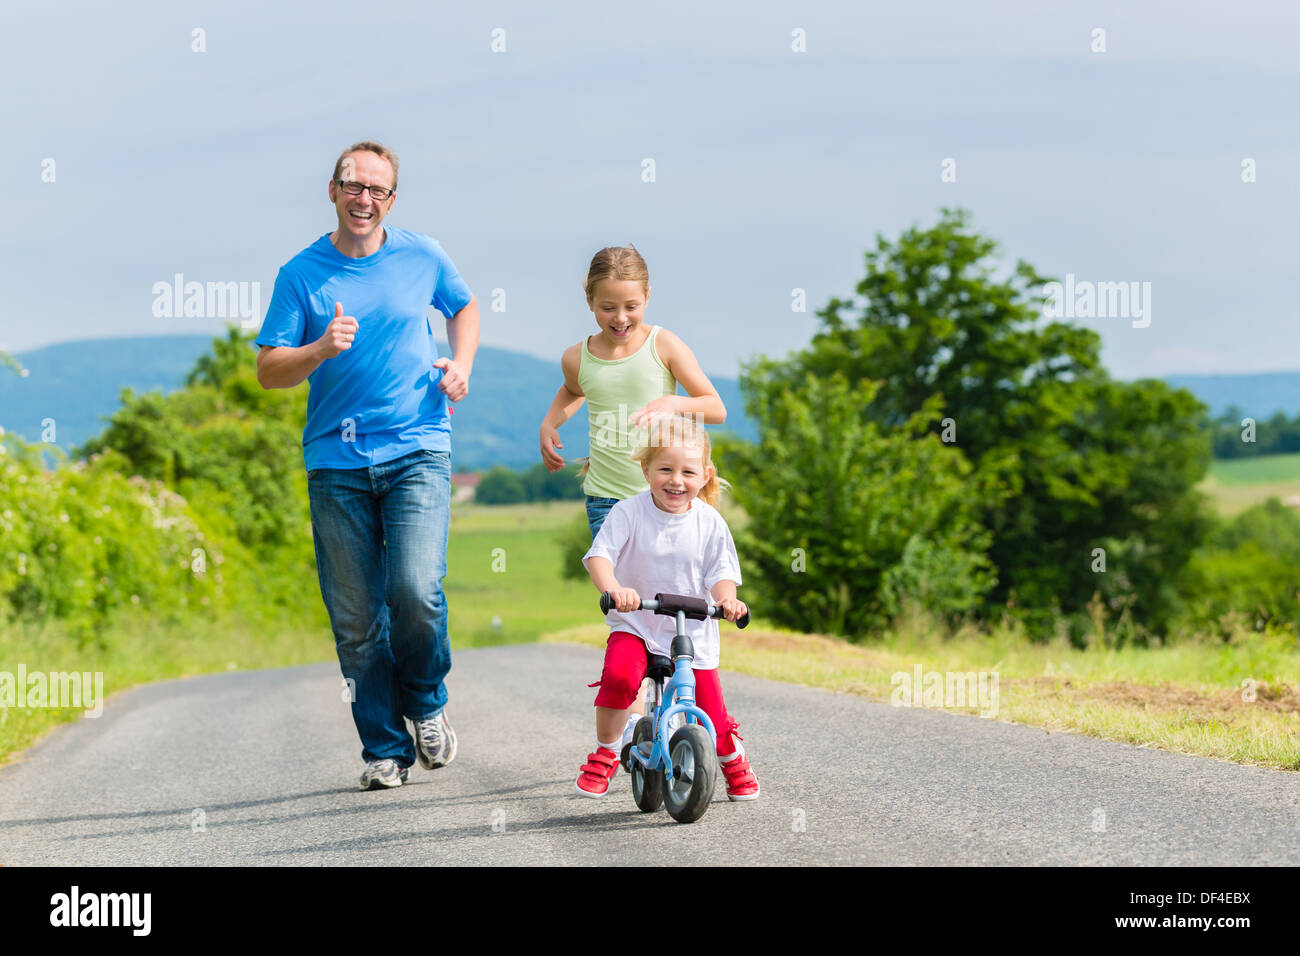 Family activity - Little girl and their father or dad running on street in rural environment Stock Photo